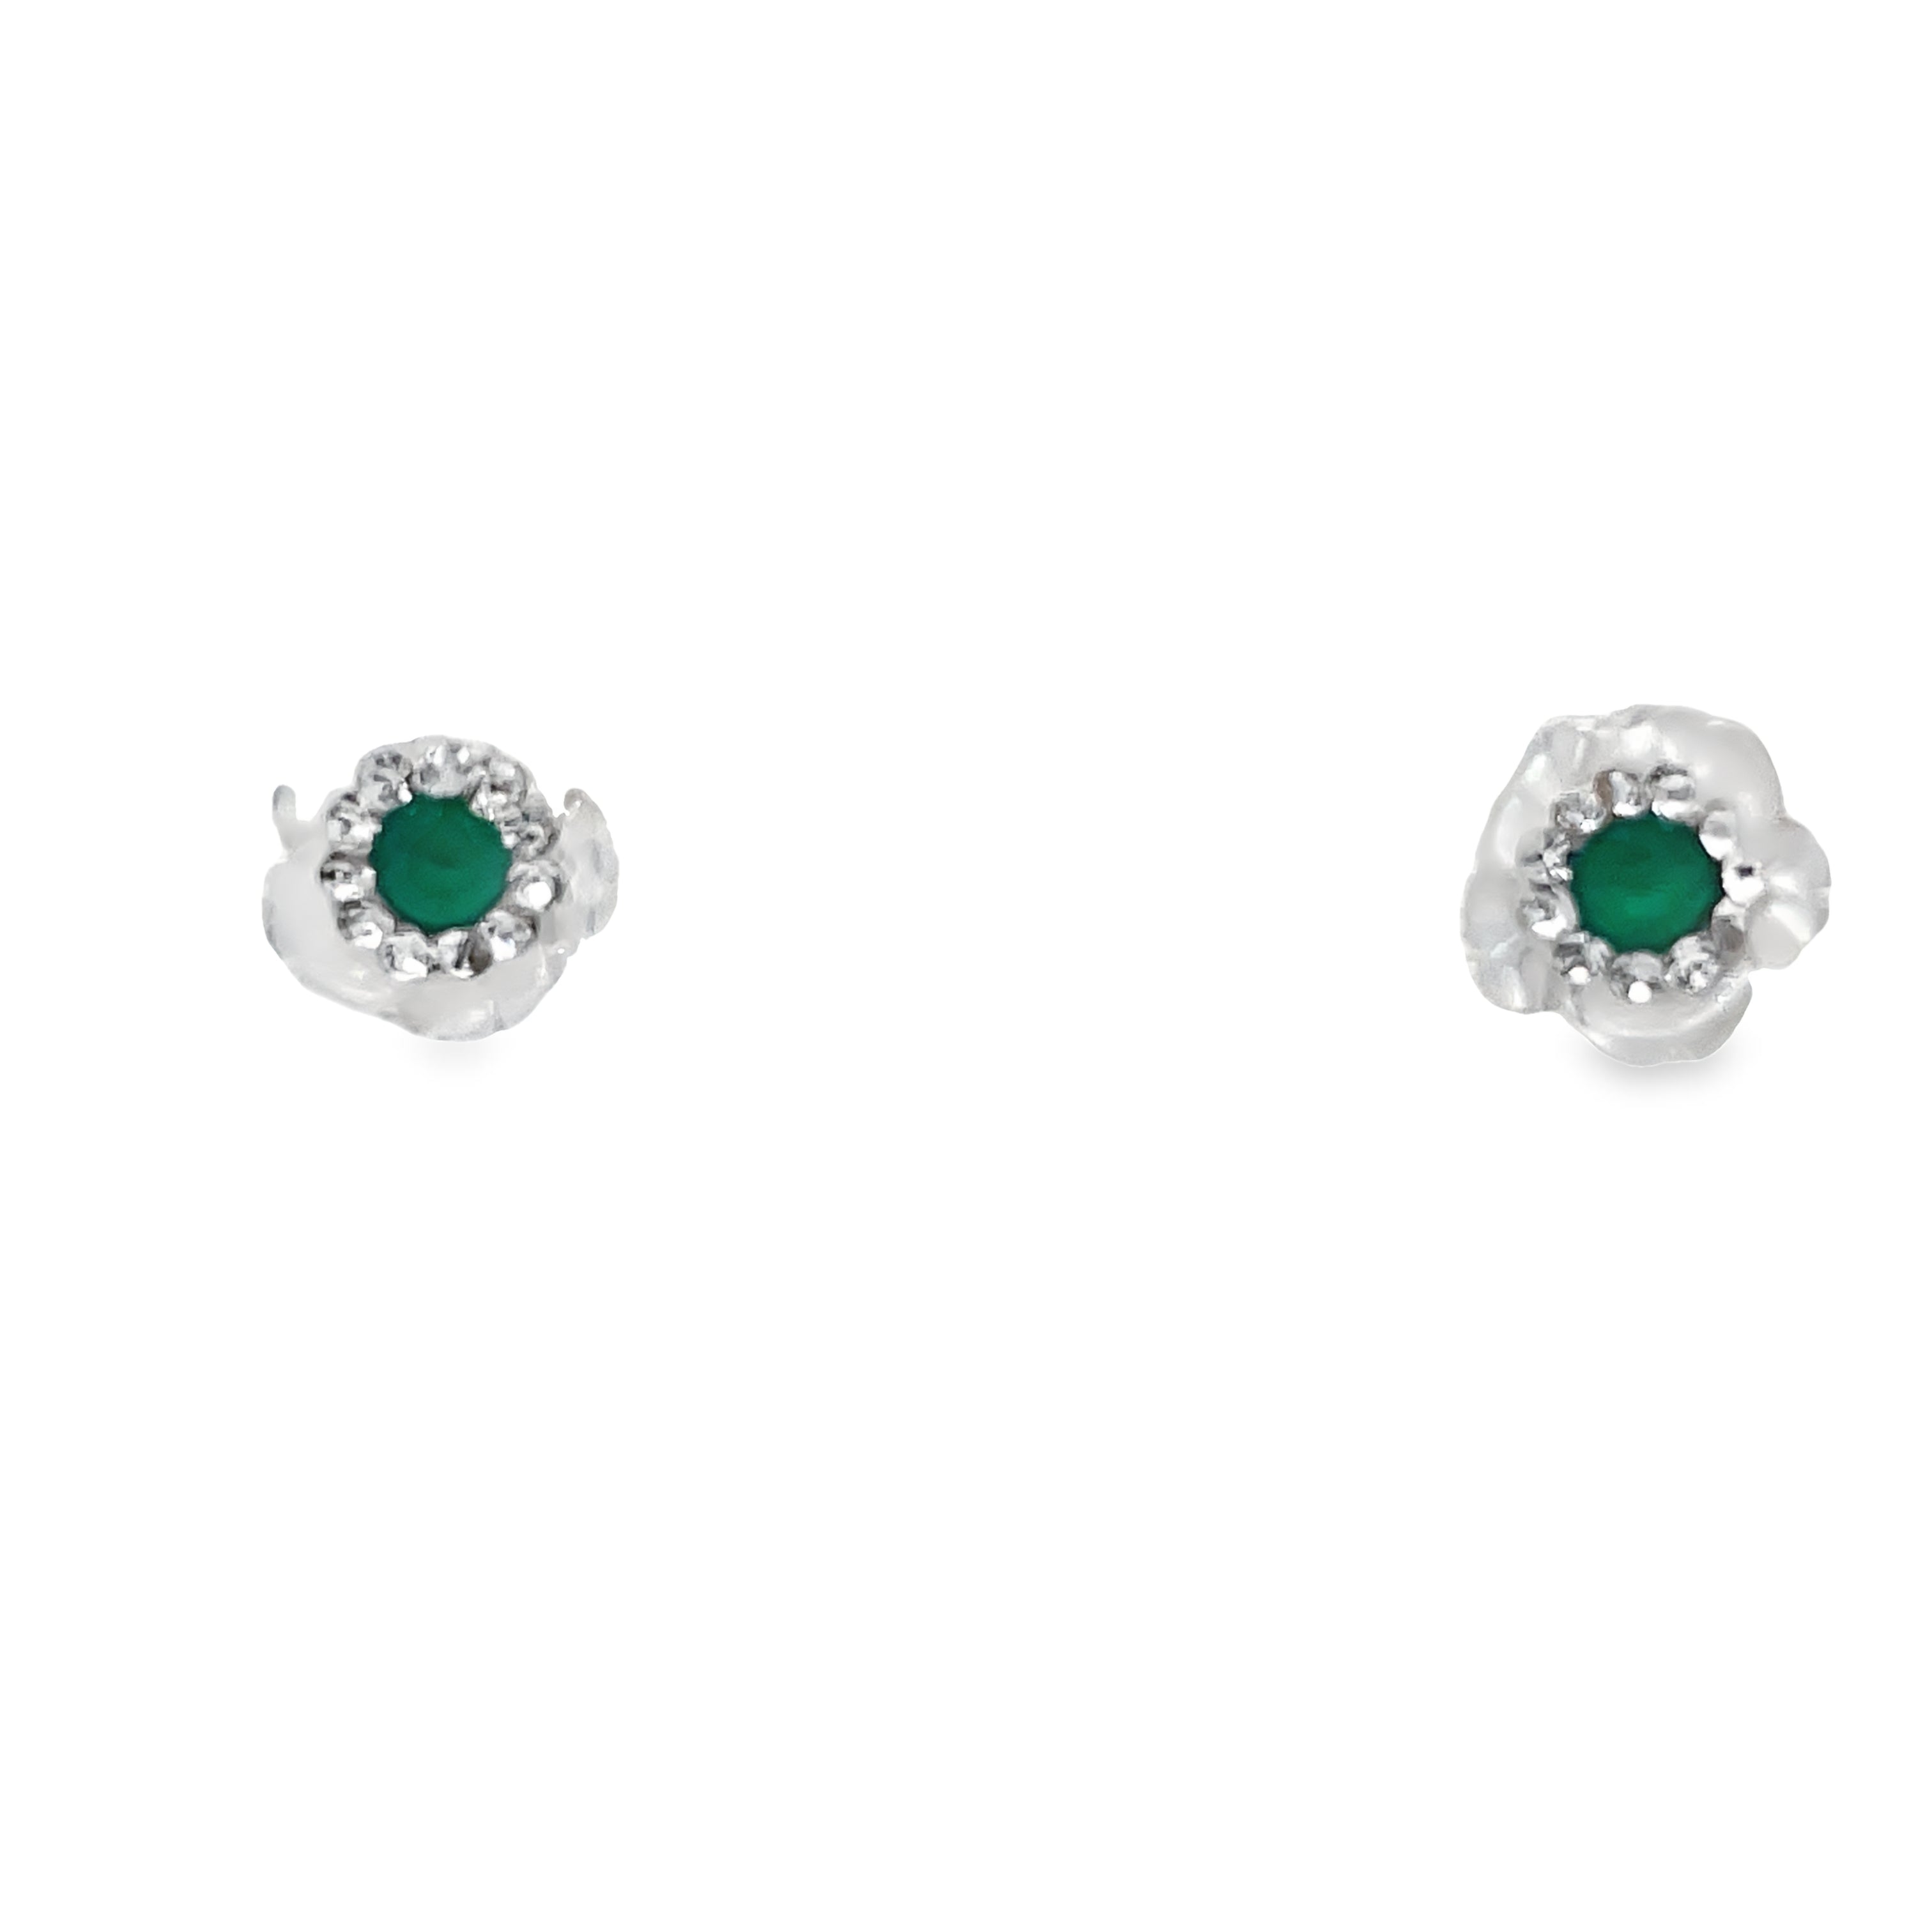 <p><span style="font-size: 0.875rem;">These exquisite flower earrings for babies feature 14k yellow gold construction with mother of pearl and emerald securely affixed using baby screw backs.</span></p> <p>&nbsp;</p>